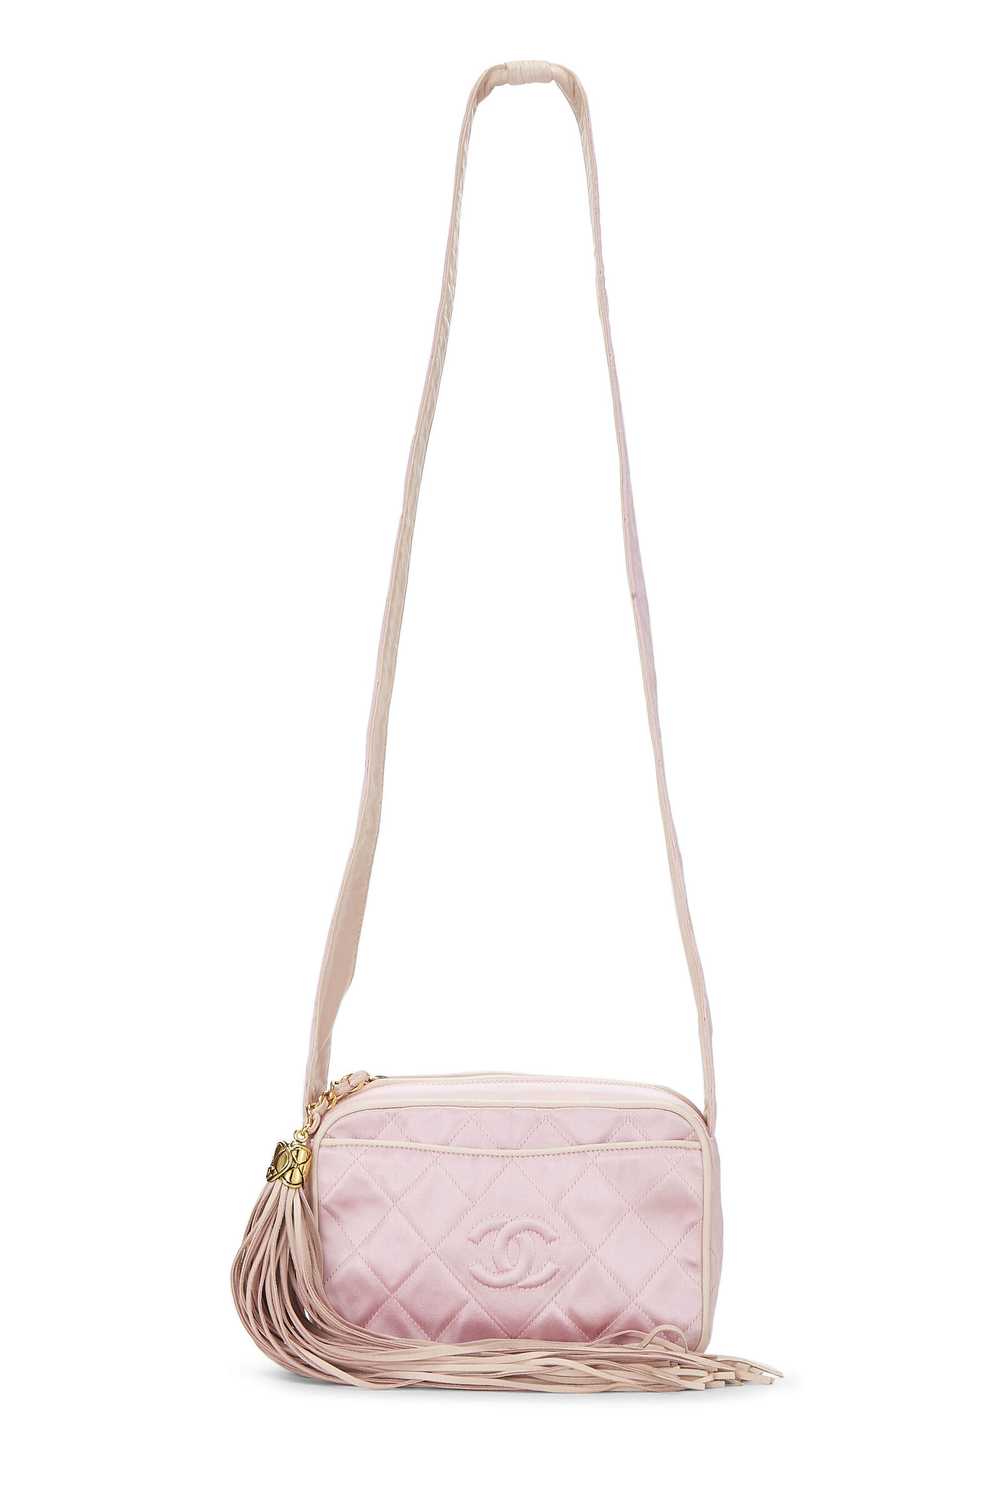 Pink Quilted Satin 'CC' Shoulder Bag Small - image 3